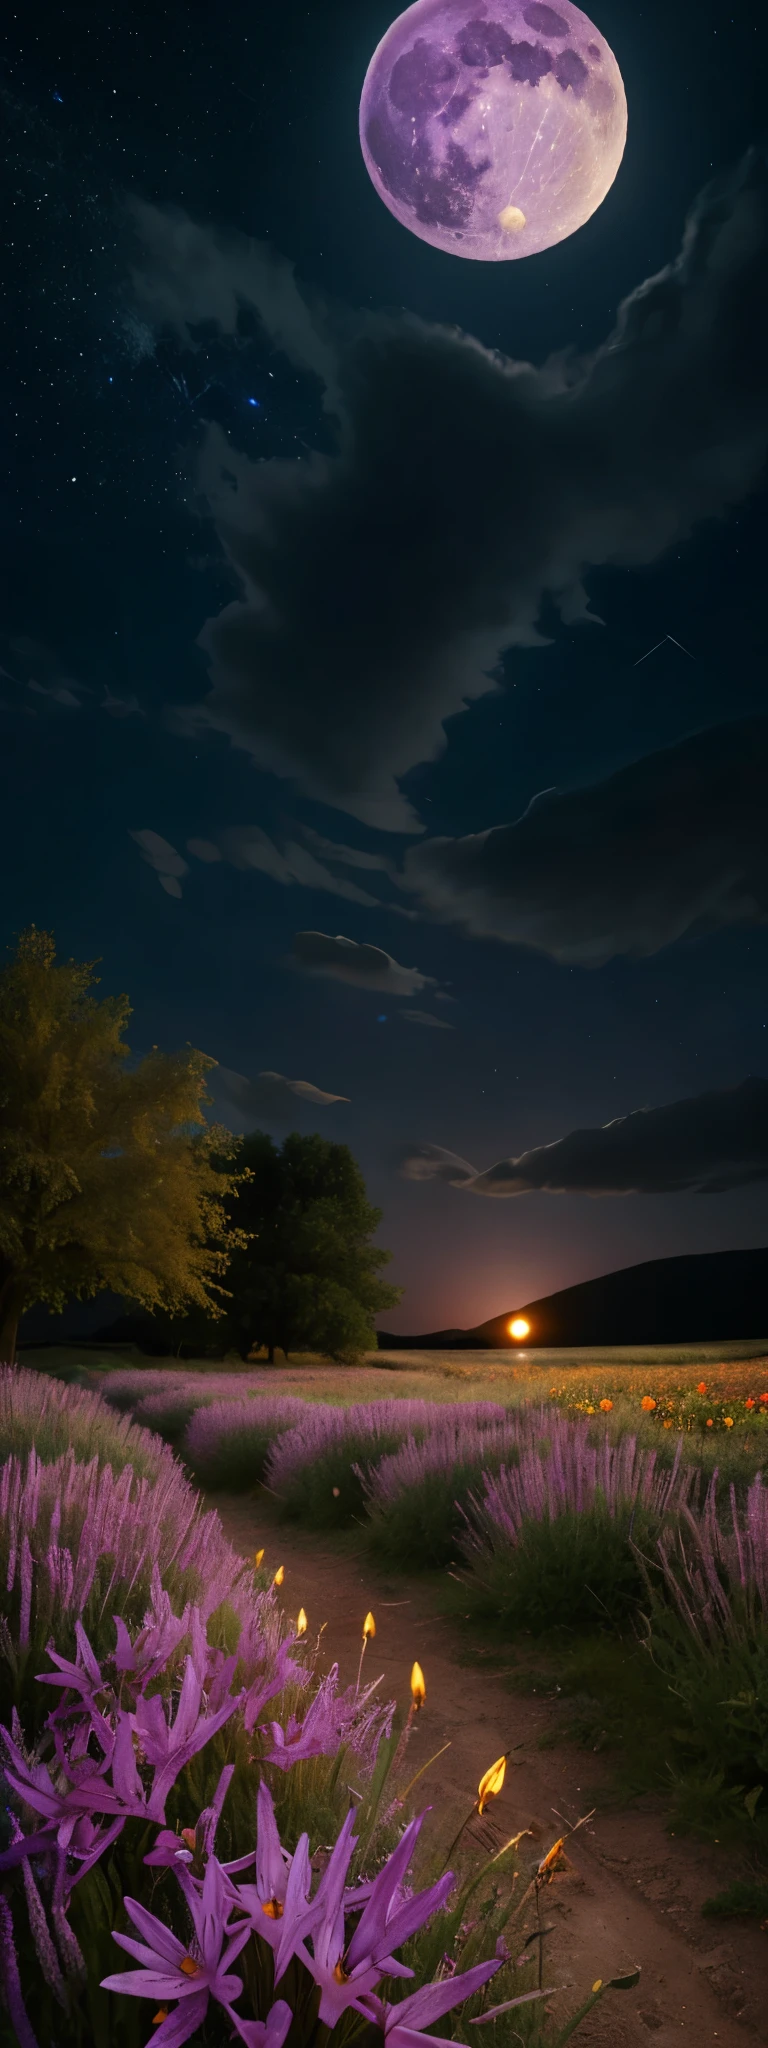 expansive landscape photography, (a view from below showing the sky above and the open field below), a wolf in a field of flowers looking up, (full moon: 1.2), (shooting stars: 0.9), (nebula: 1.3), distant mountain, Tree BREAK production art, (warm light source: 1.2), (Firefly: 1.2), lamp, lots of purple and orange,  intricate details, volumetric lighting, BREAK realism (masterpiece: 1.2), (best quality), 4k, ultra-detailed, (dynamic composition: 1.4), very detailed, colorful details, (iridescent colors: 1.2), (bright lighting, atmospheric lighting), dreamy, magical, (only: 1.2)